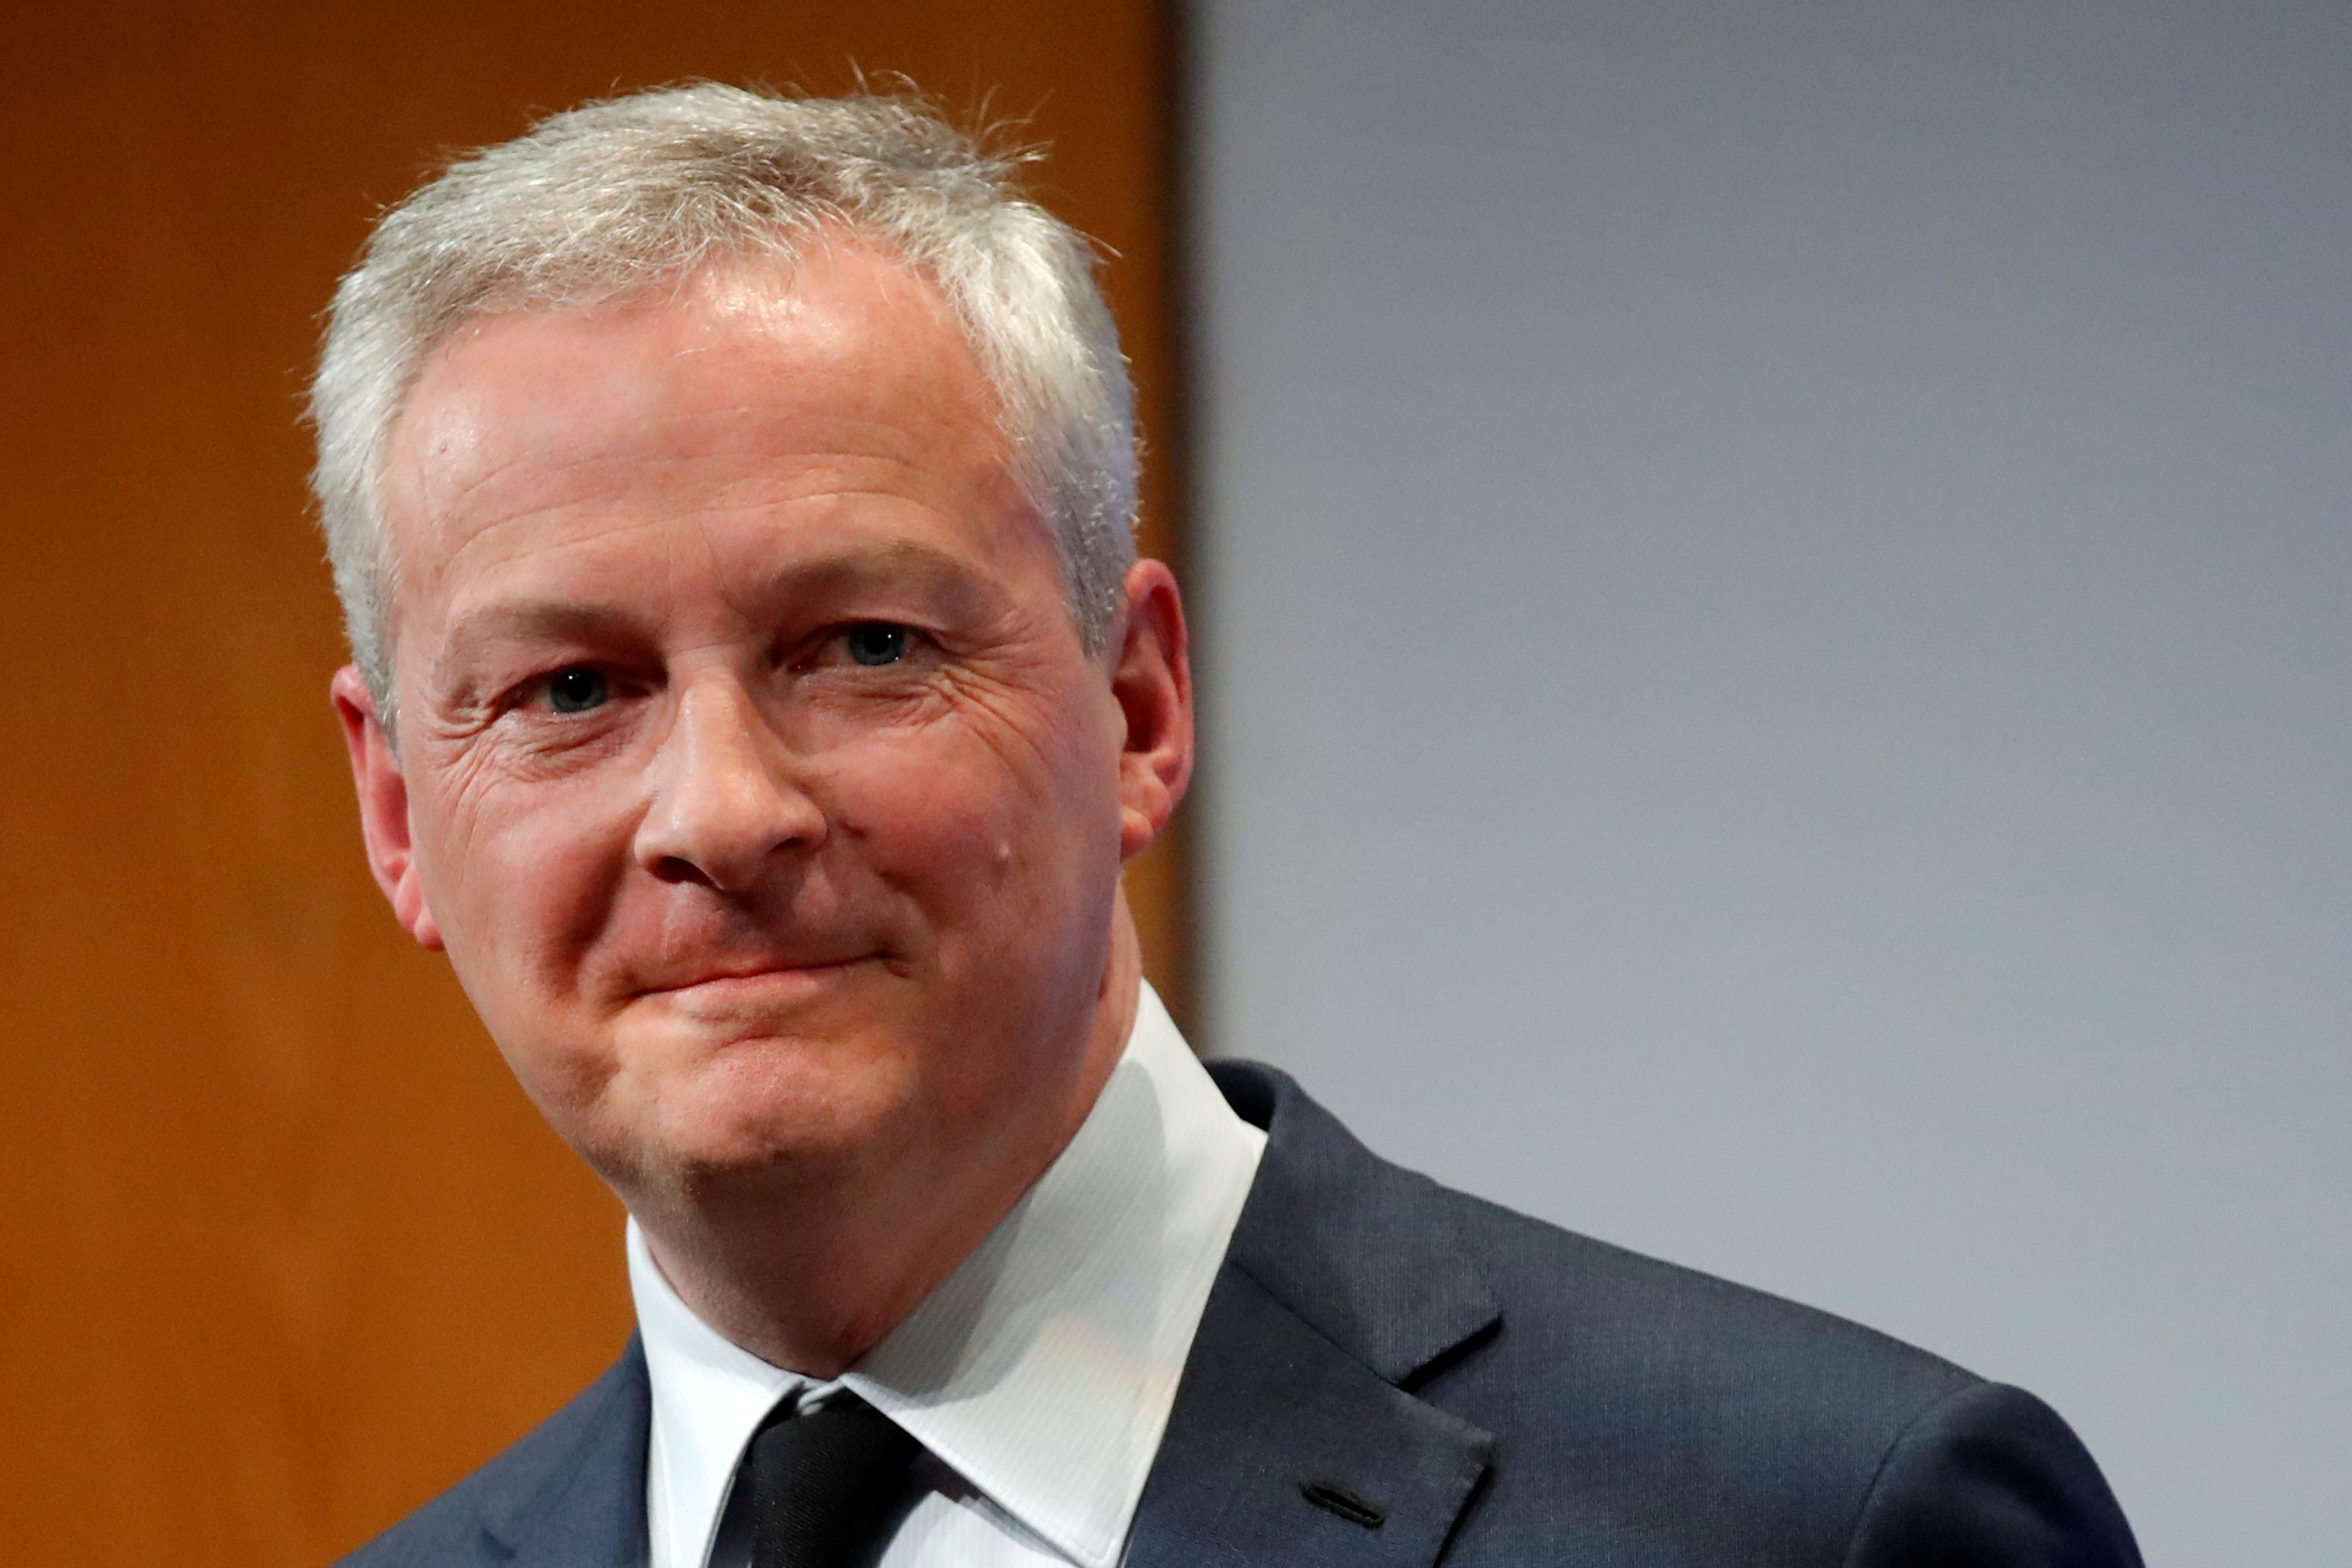 FILE PHOTO: French Finance Minister Bruno Le Maire reacts after his New Year address to France's economic officials and the media at the Bercy Finance Ministry in Paris, France, January 7, 2020. REUTERS/Charles Platiau/File Photo